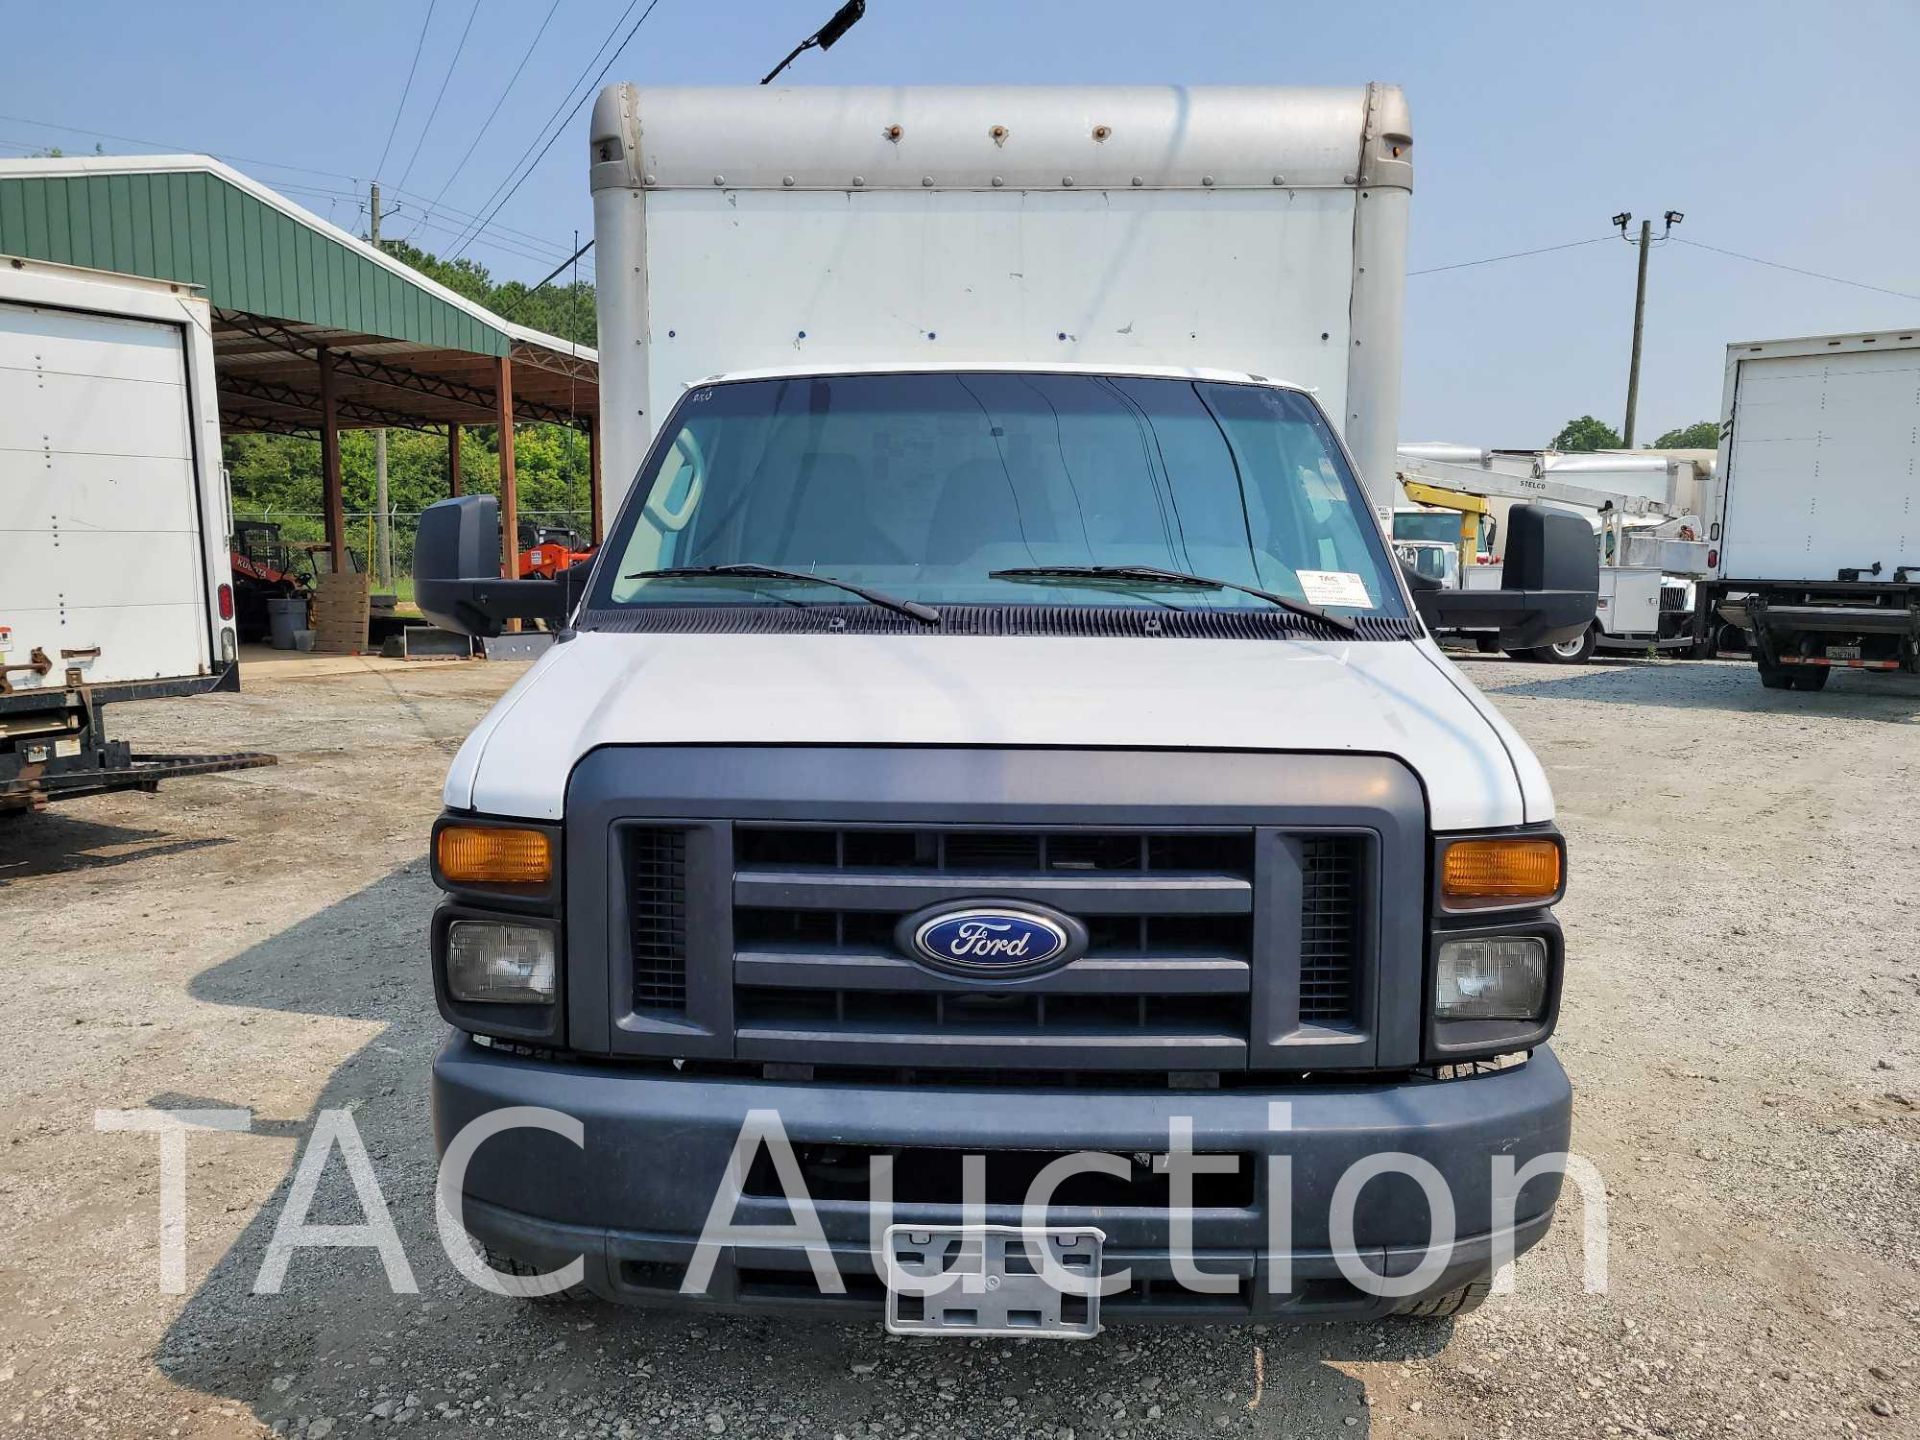 2015 Ford E-350 16ft Box Truck - Image 2 of 46